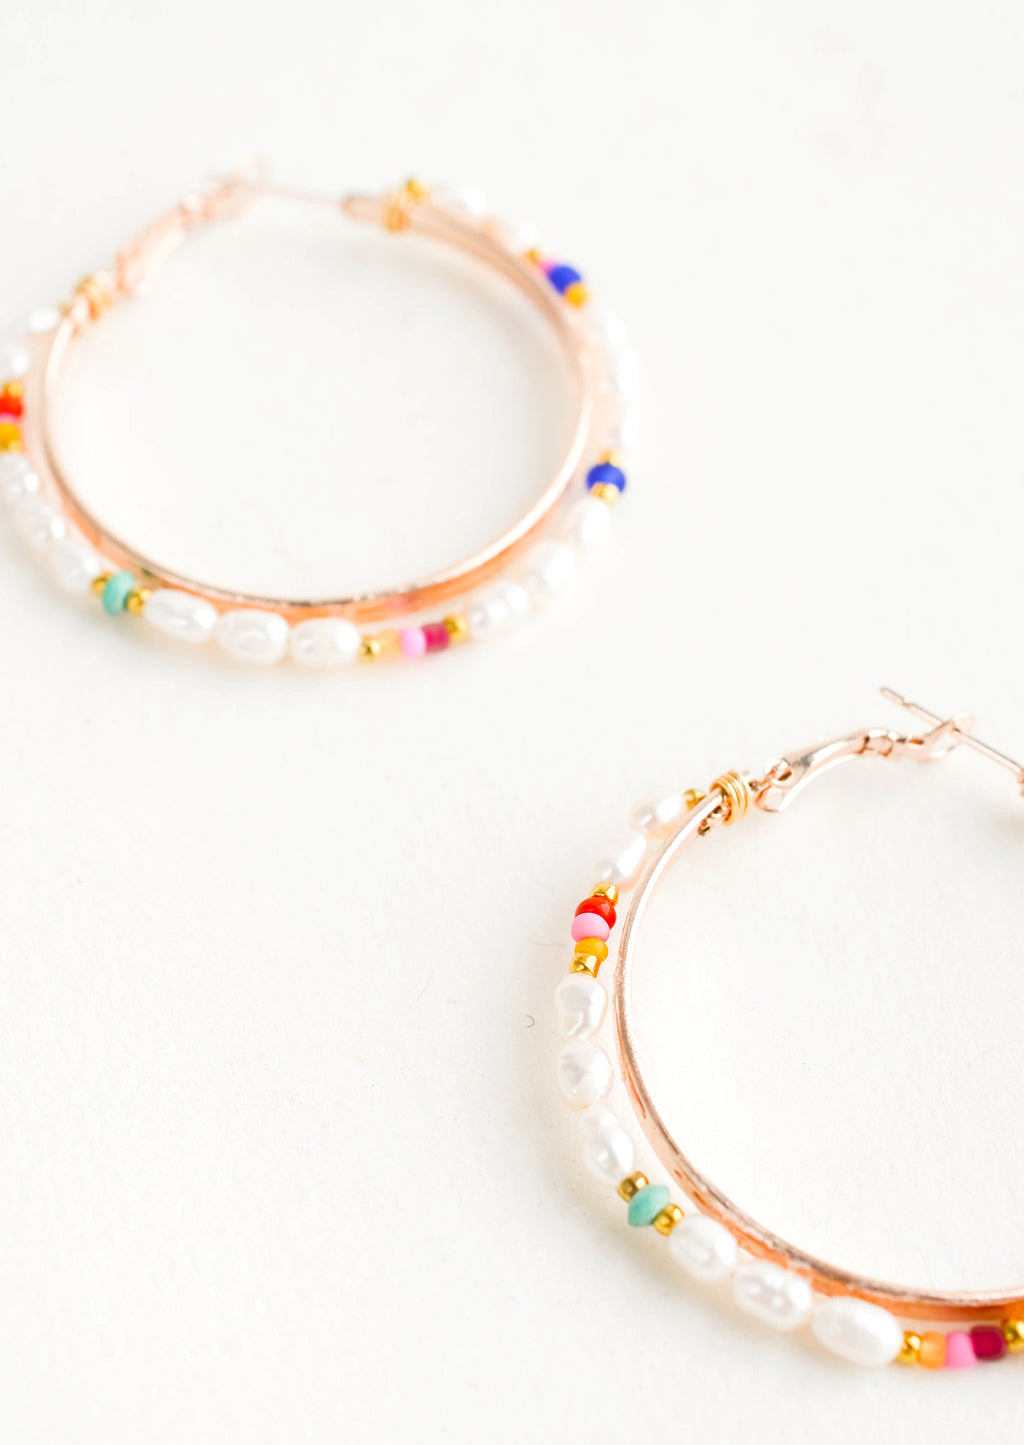 2: Round hoop earrings with beaded outer layer of pearls and colored glass seed beads and rosegold inner hoop